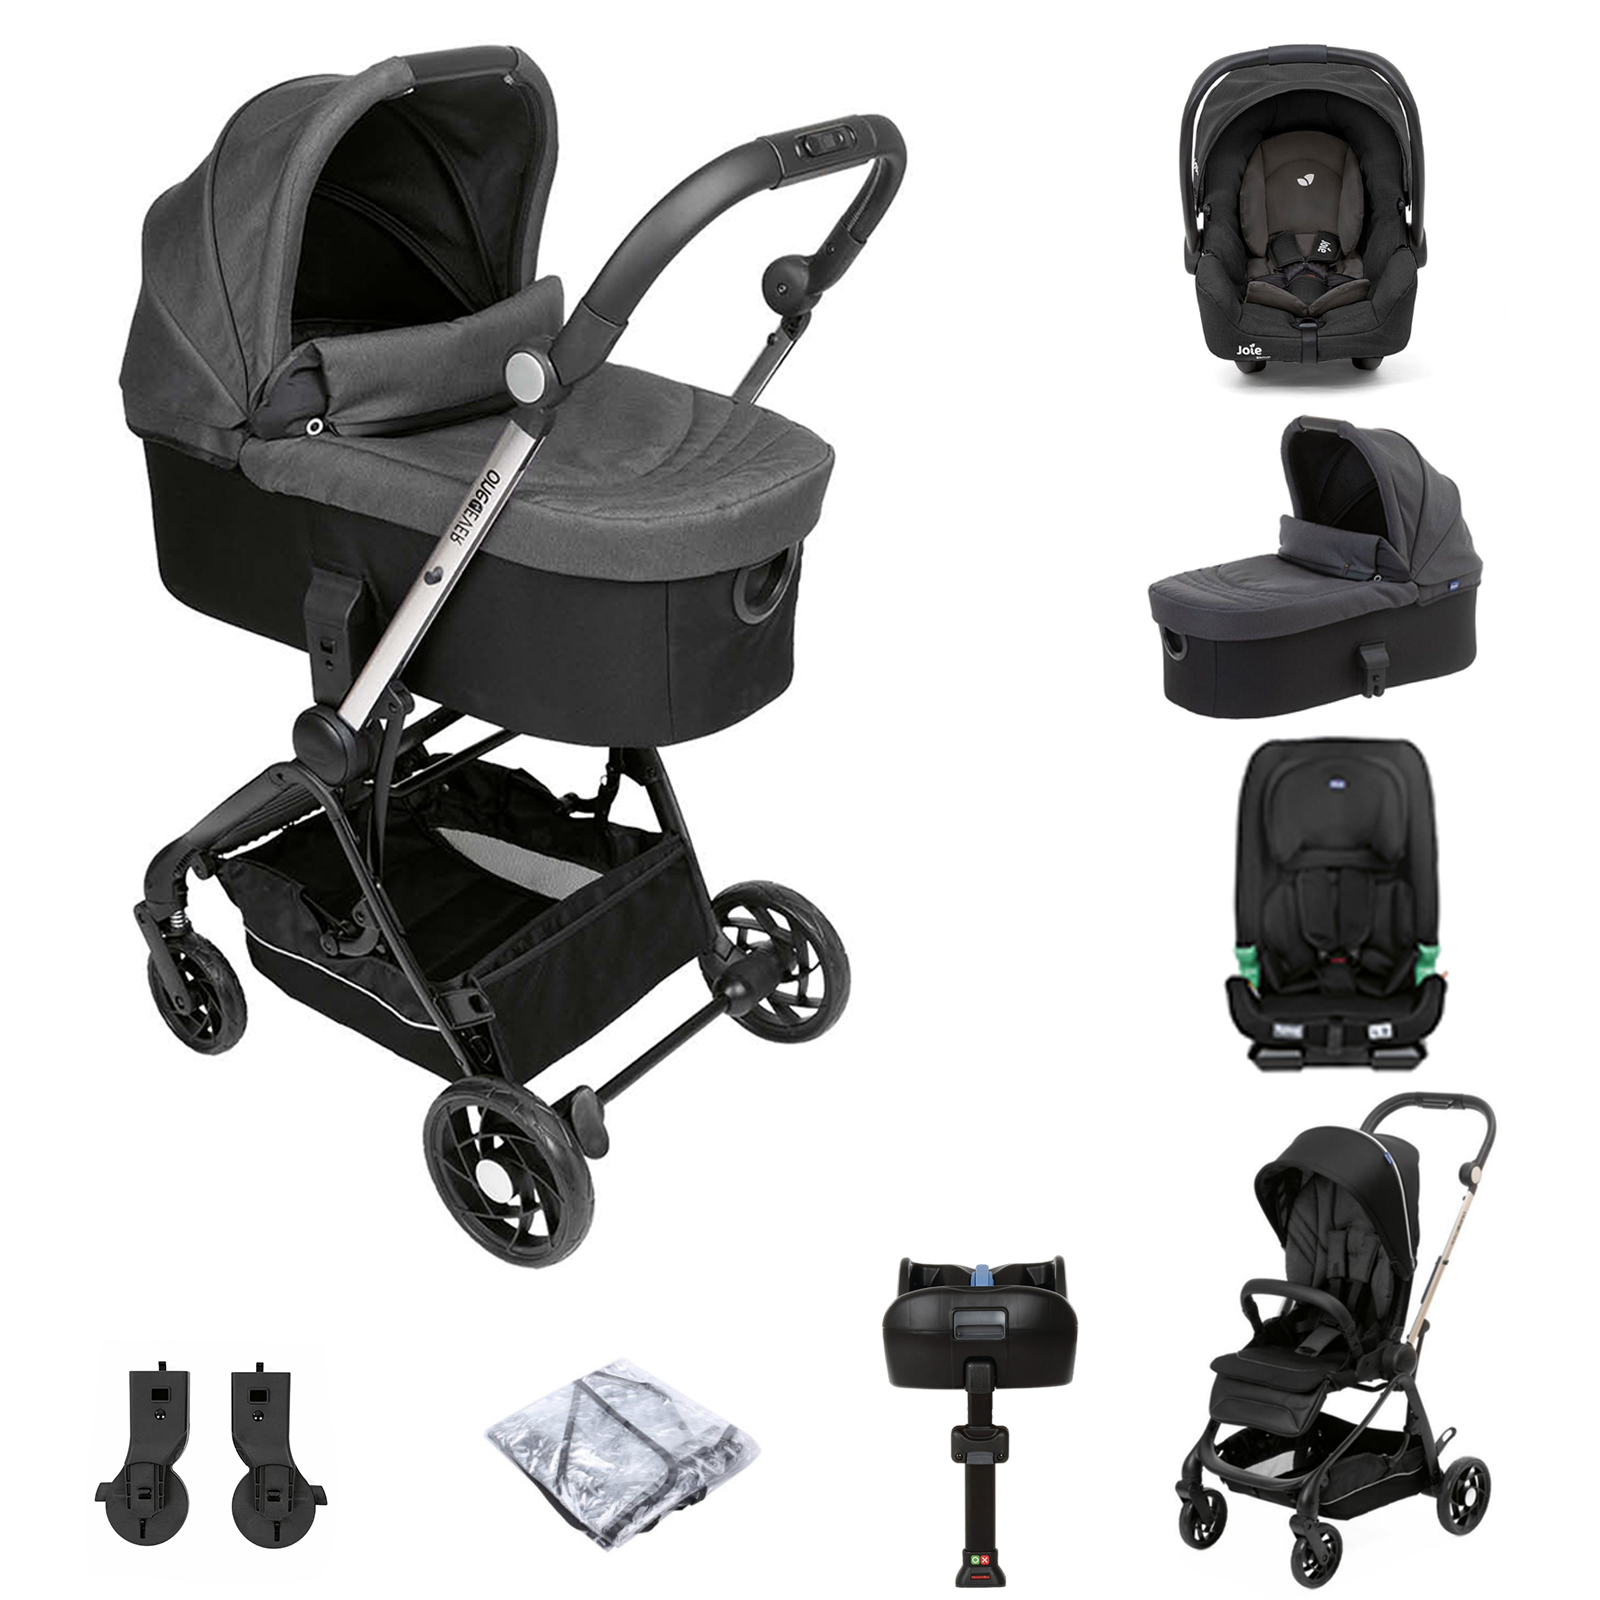 Chicco One4ever Gemm ISOFIX Travel System, Carry Cot & I-Size Car Seat - Pirate Black